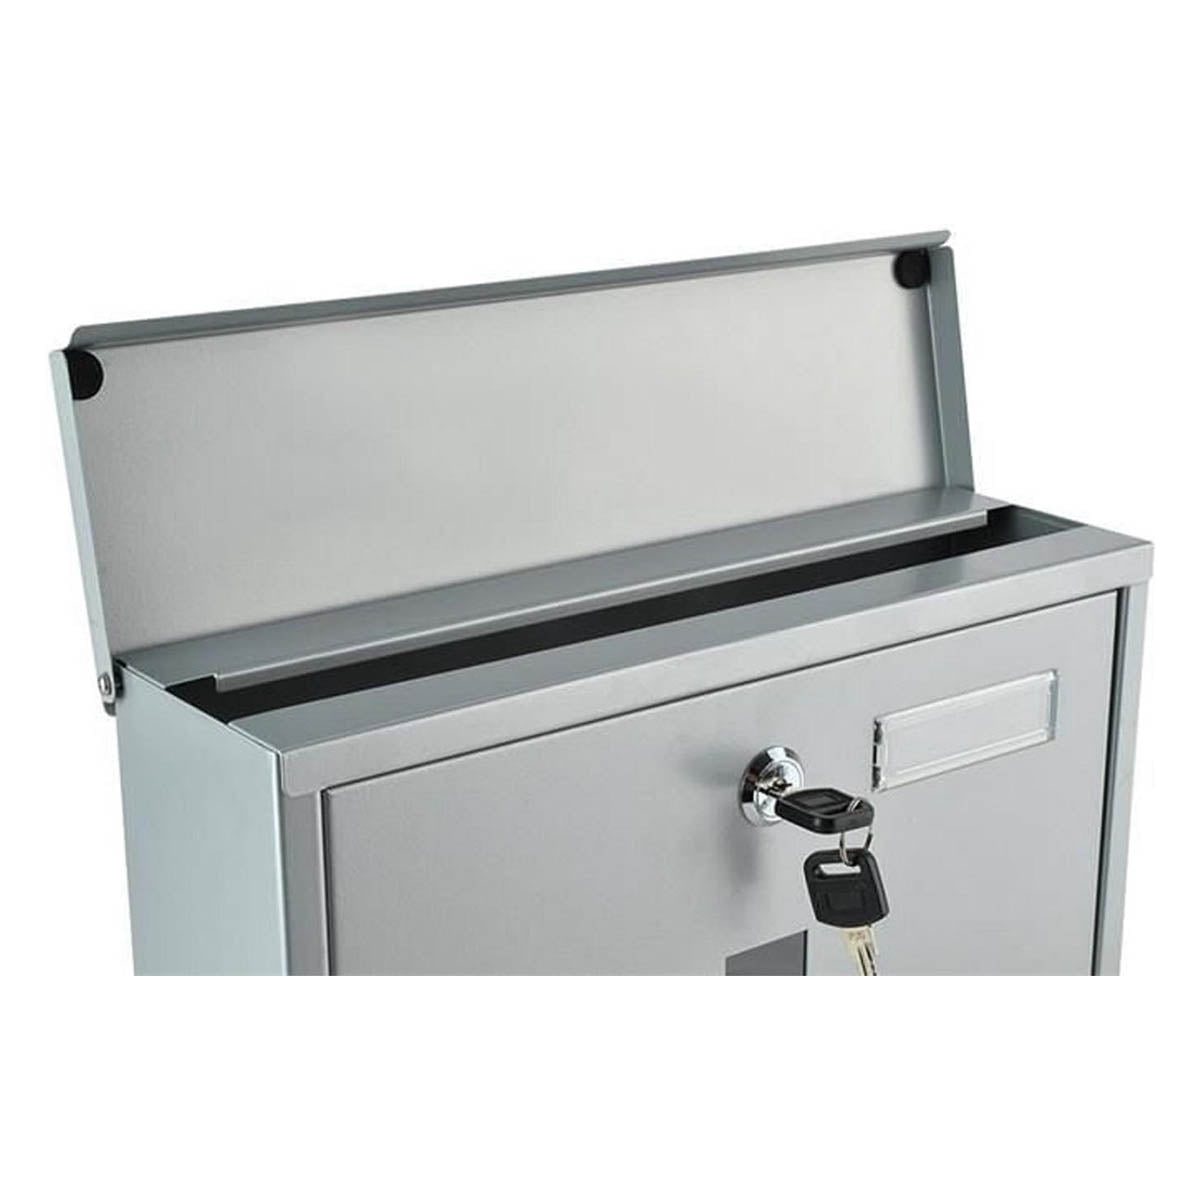 <tc>Ariko</tc> wall letterbox - stainless steel - with newspaper roll - gray - up to 8 newspapers